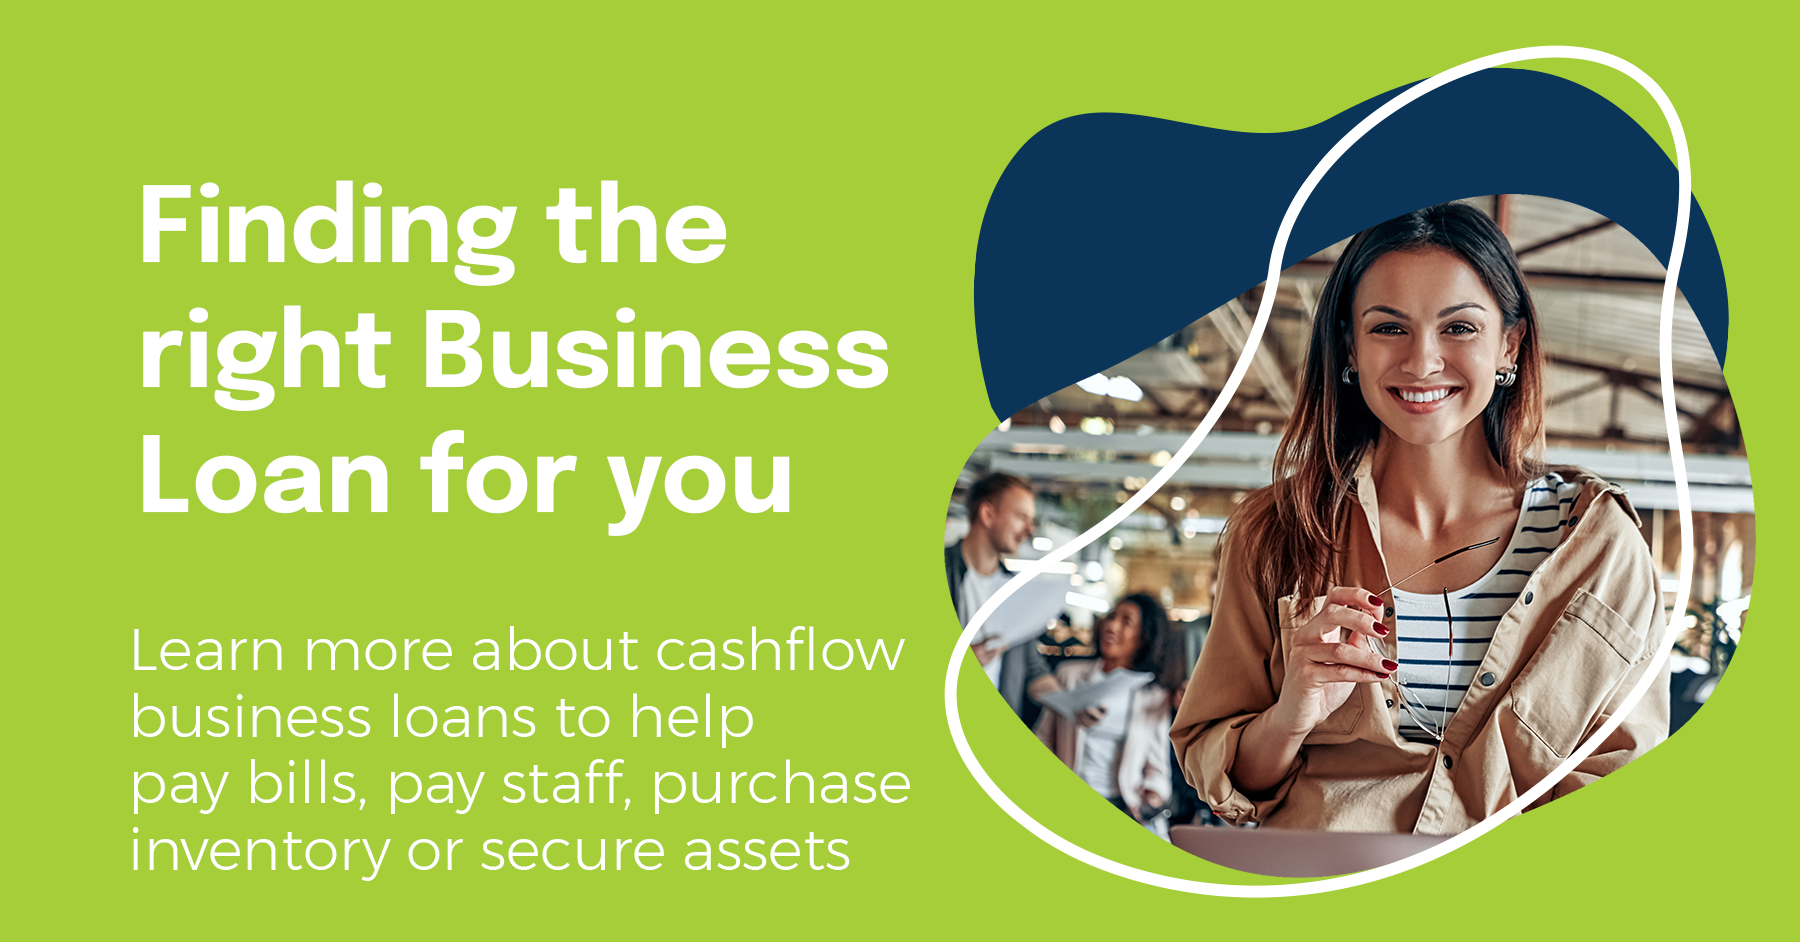 Cash Flow Loans for Small Businesses- Are they right for you